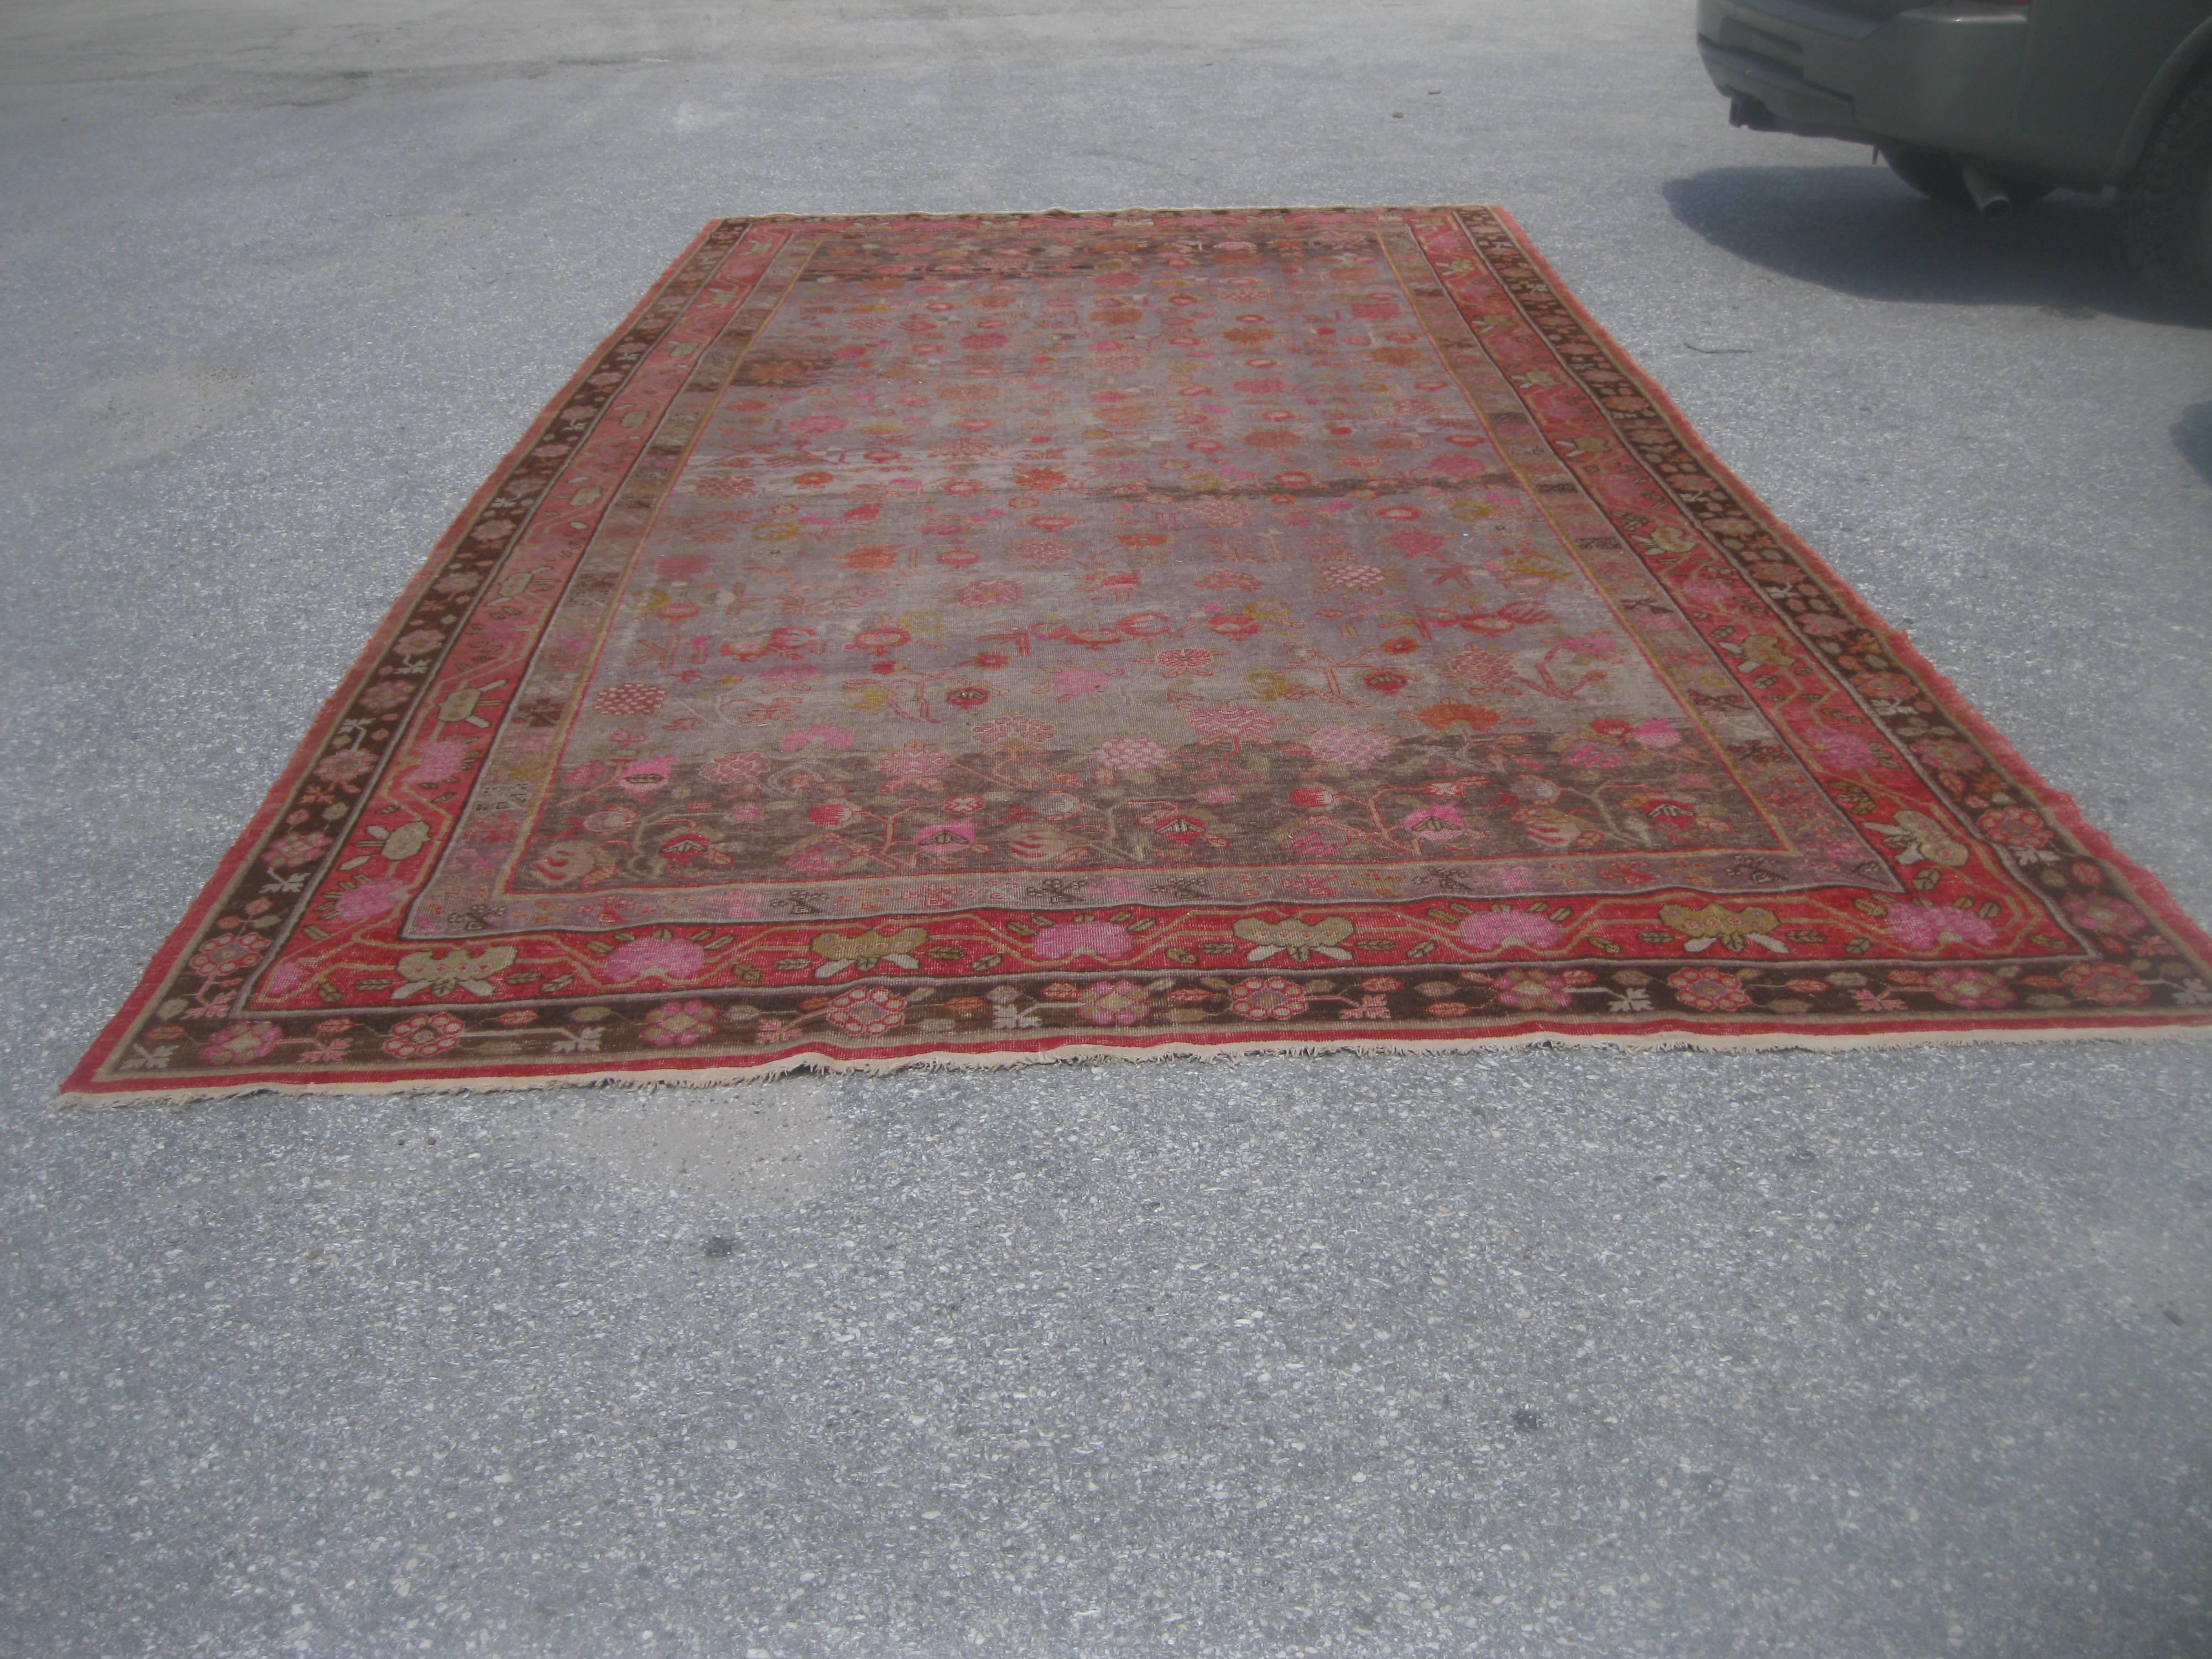 Very handsome large Khotan rug with geometrical designs.

Background of rug field is much lighter tending toward the grays, with more muted pattern.

                  